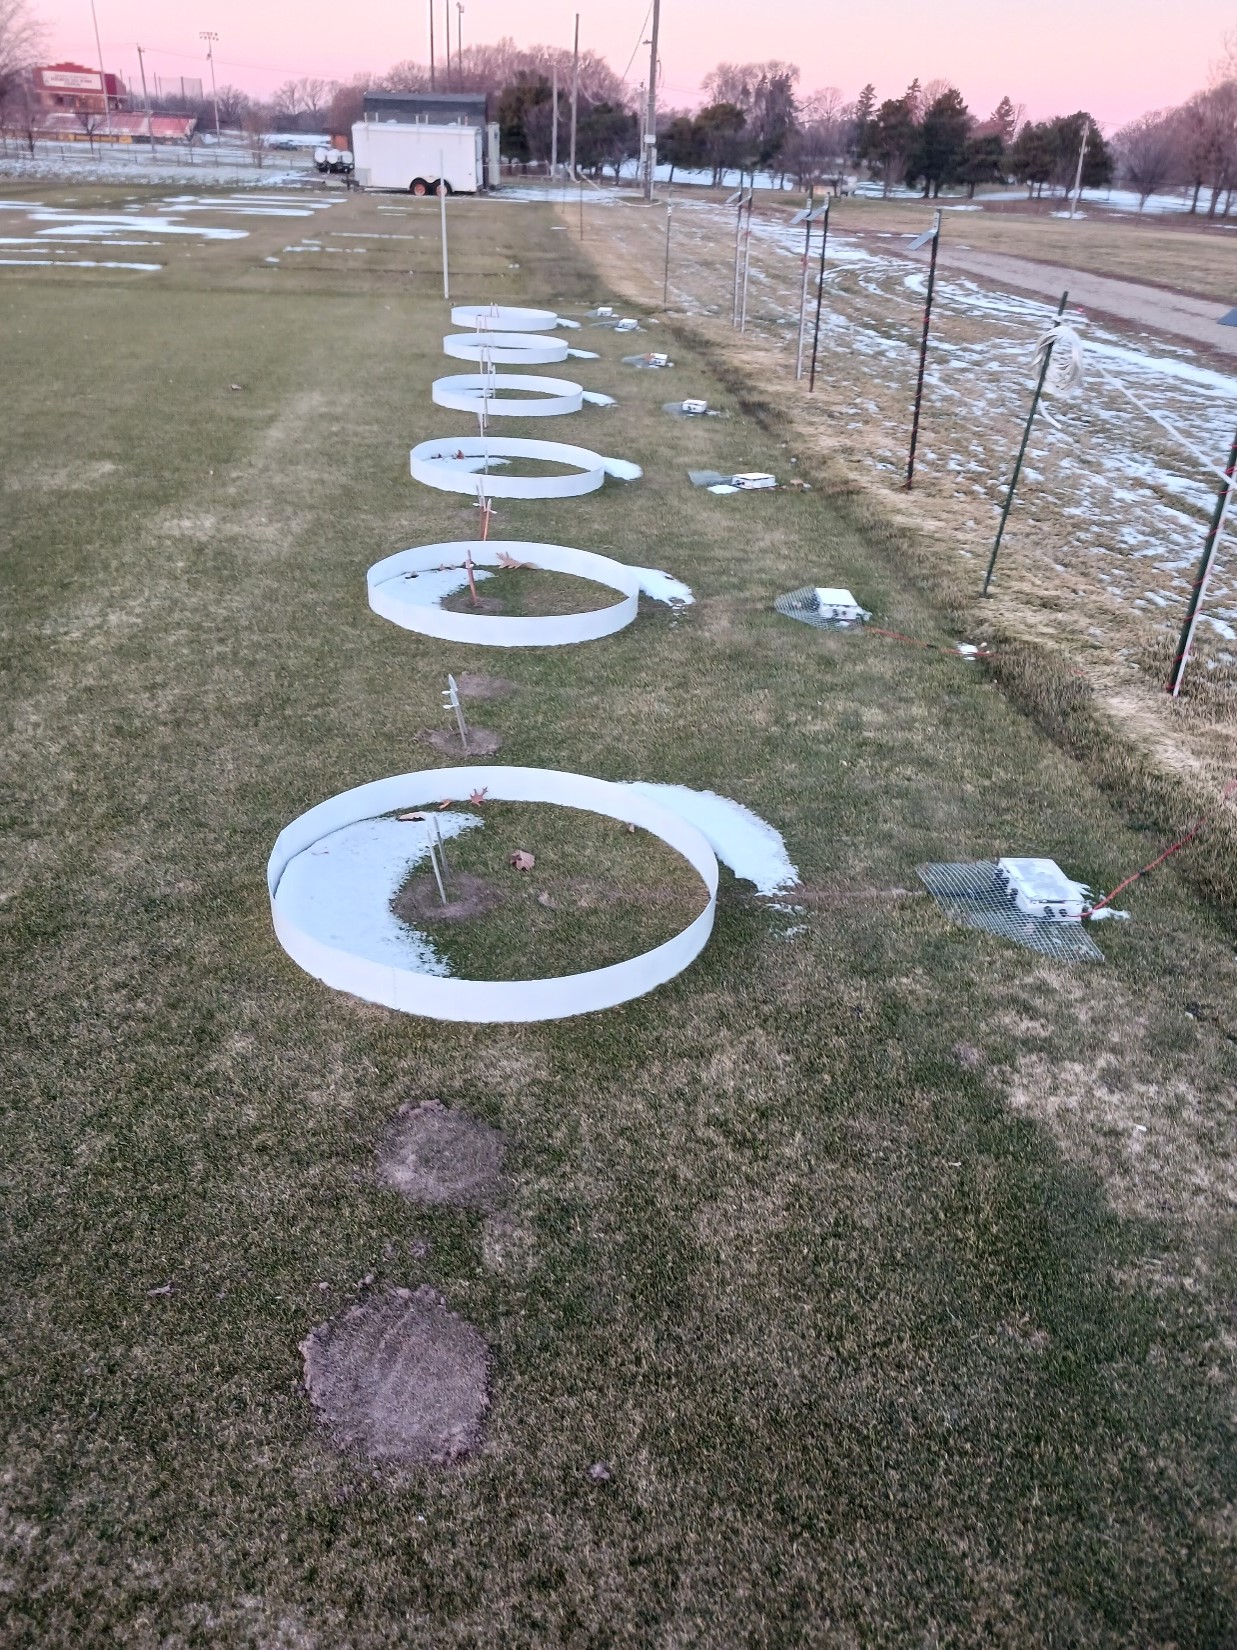 turfgrass research plots with plastic circular structures